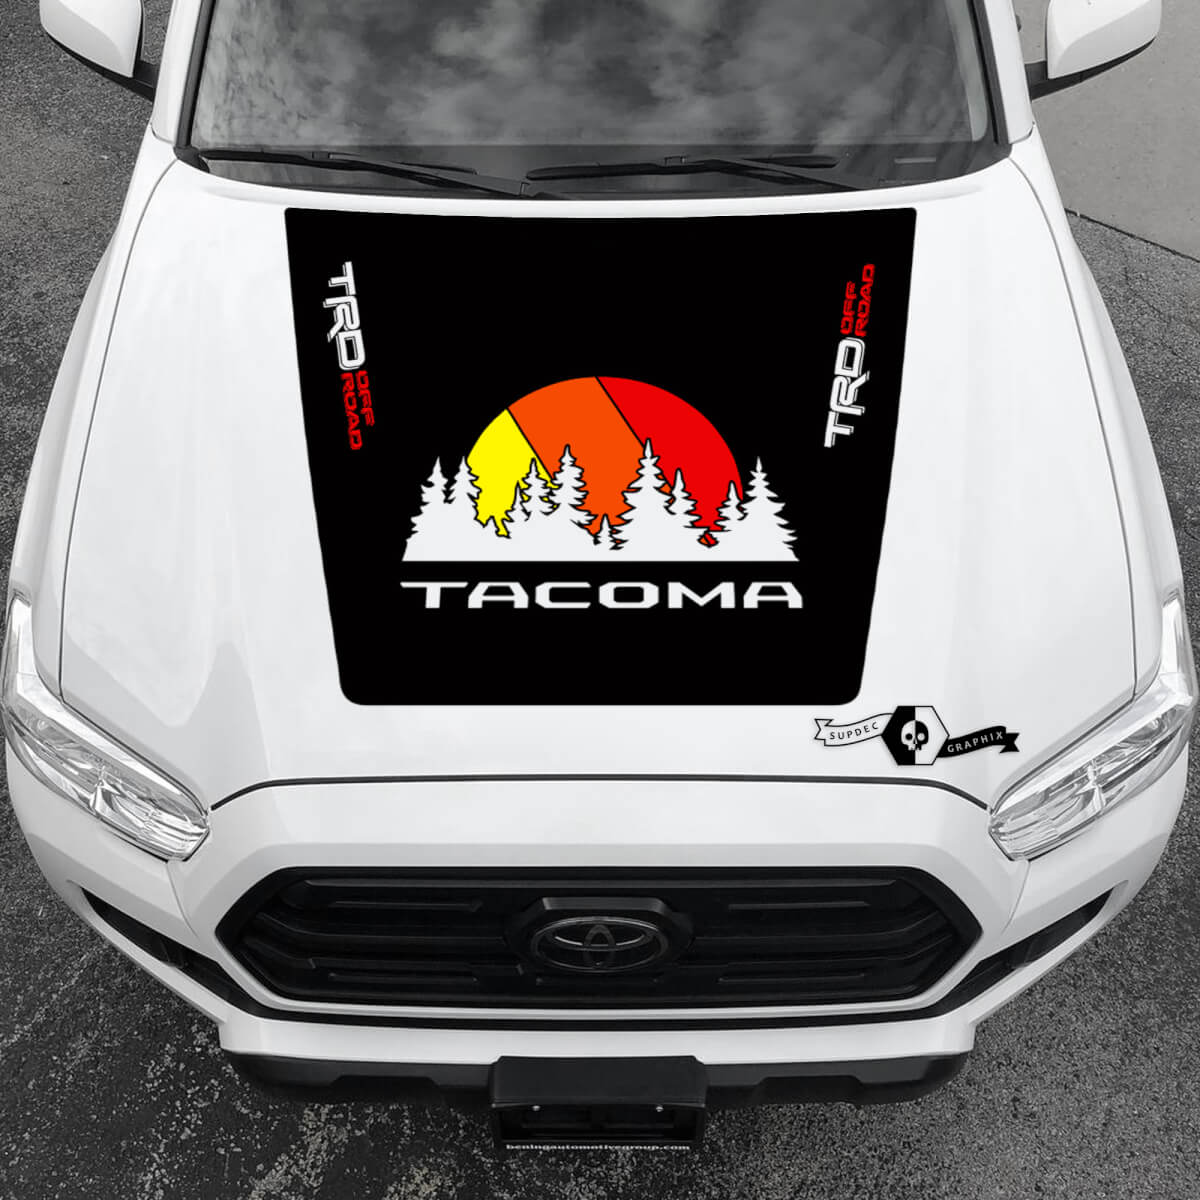 Tacoma TRD Sunrise Vintage TOYOTA Forest Off Road Hood Decals Stickers for Tacoma Tundra 4Runner Hilux